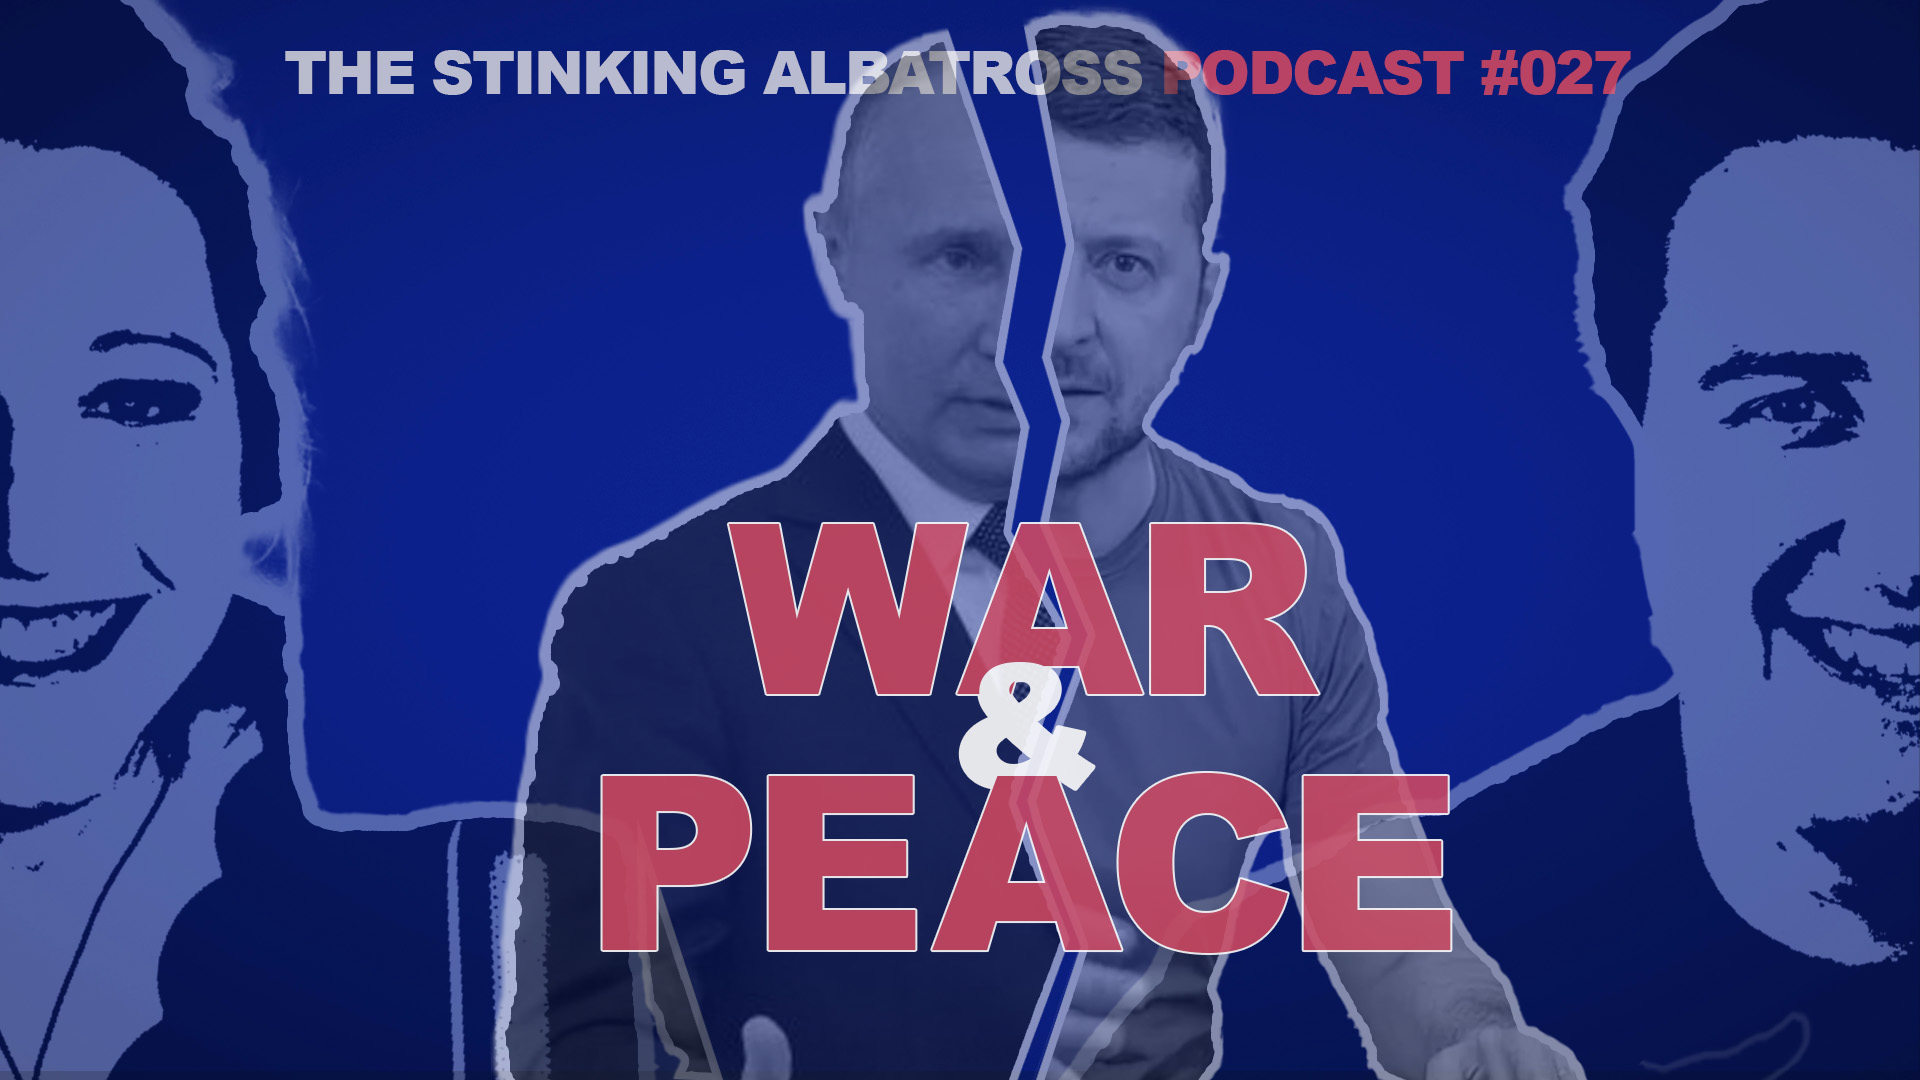 The Stinking Albatross Podcast: A Conservative's Guide to War and Peace